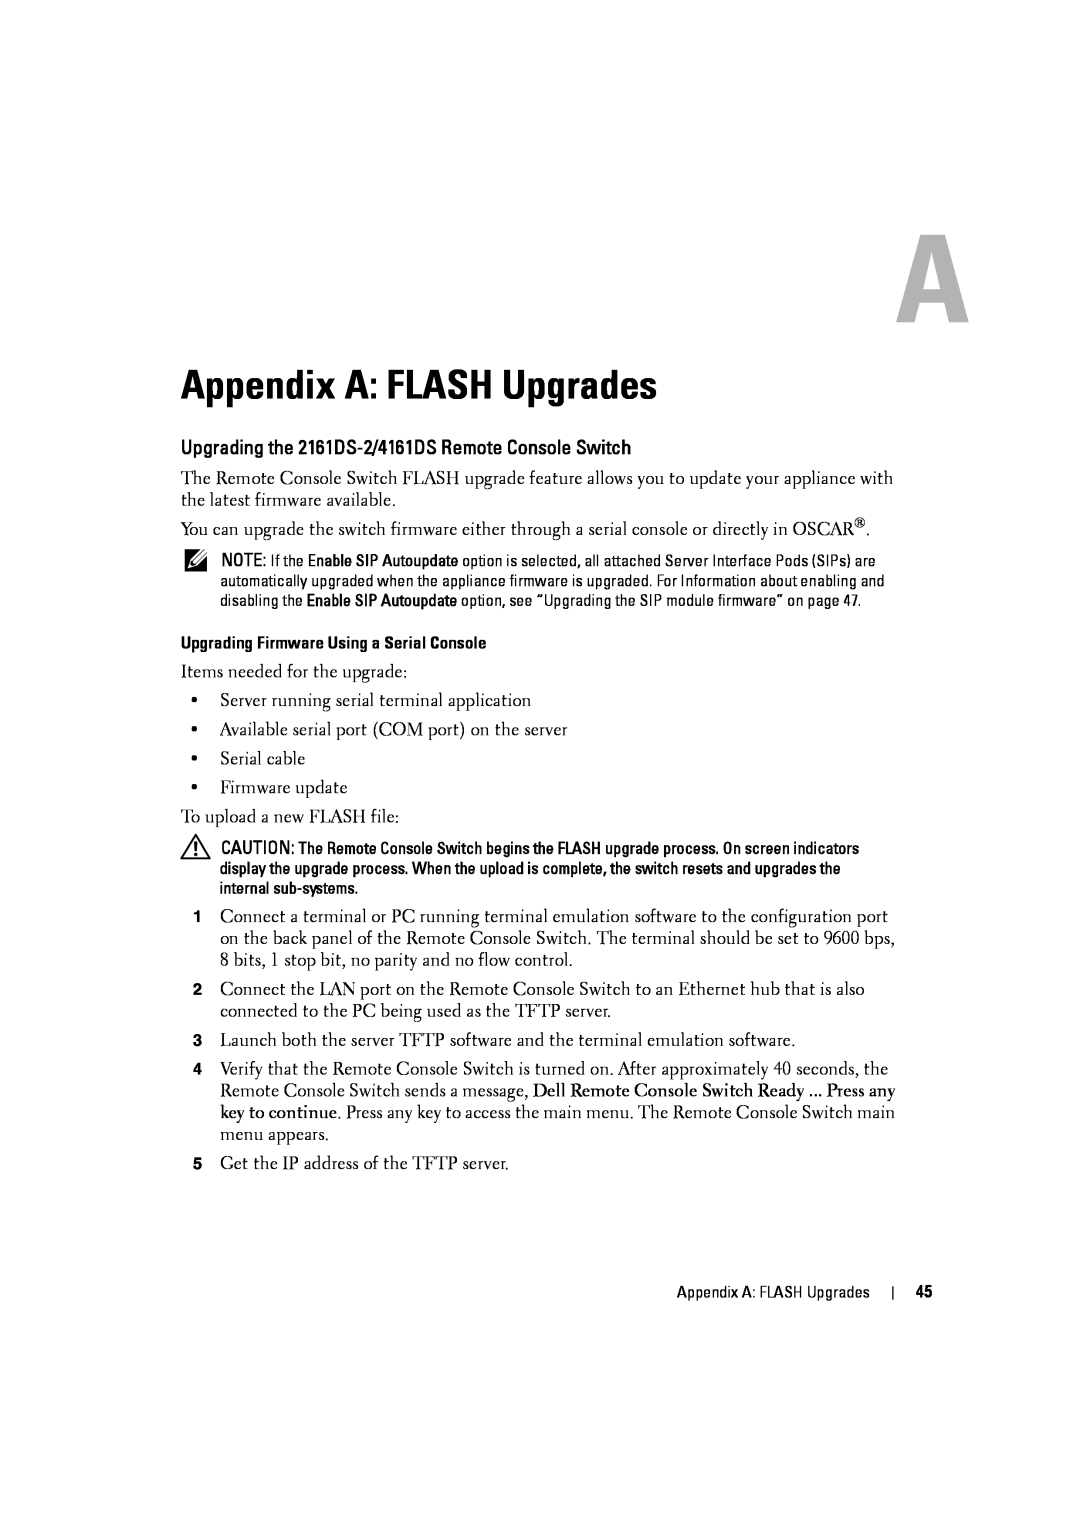 Dell manual Appendix A FLASH Upgrades, Upgrading the 2161DS-2/4161DS Remote Console Switch 